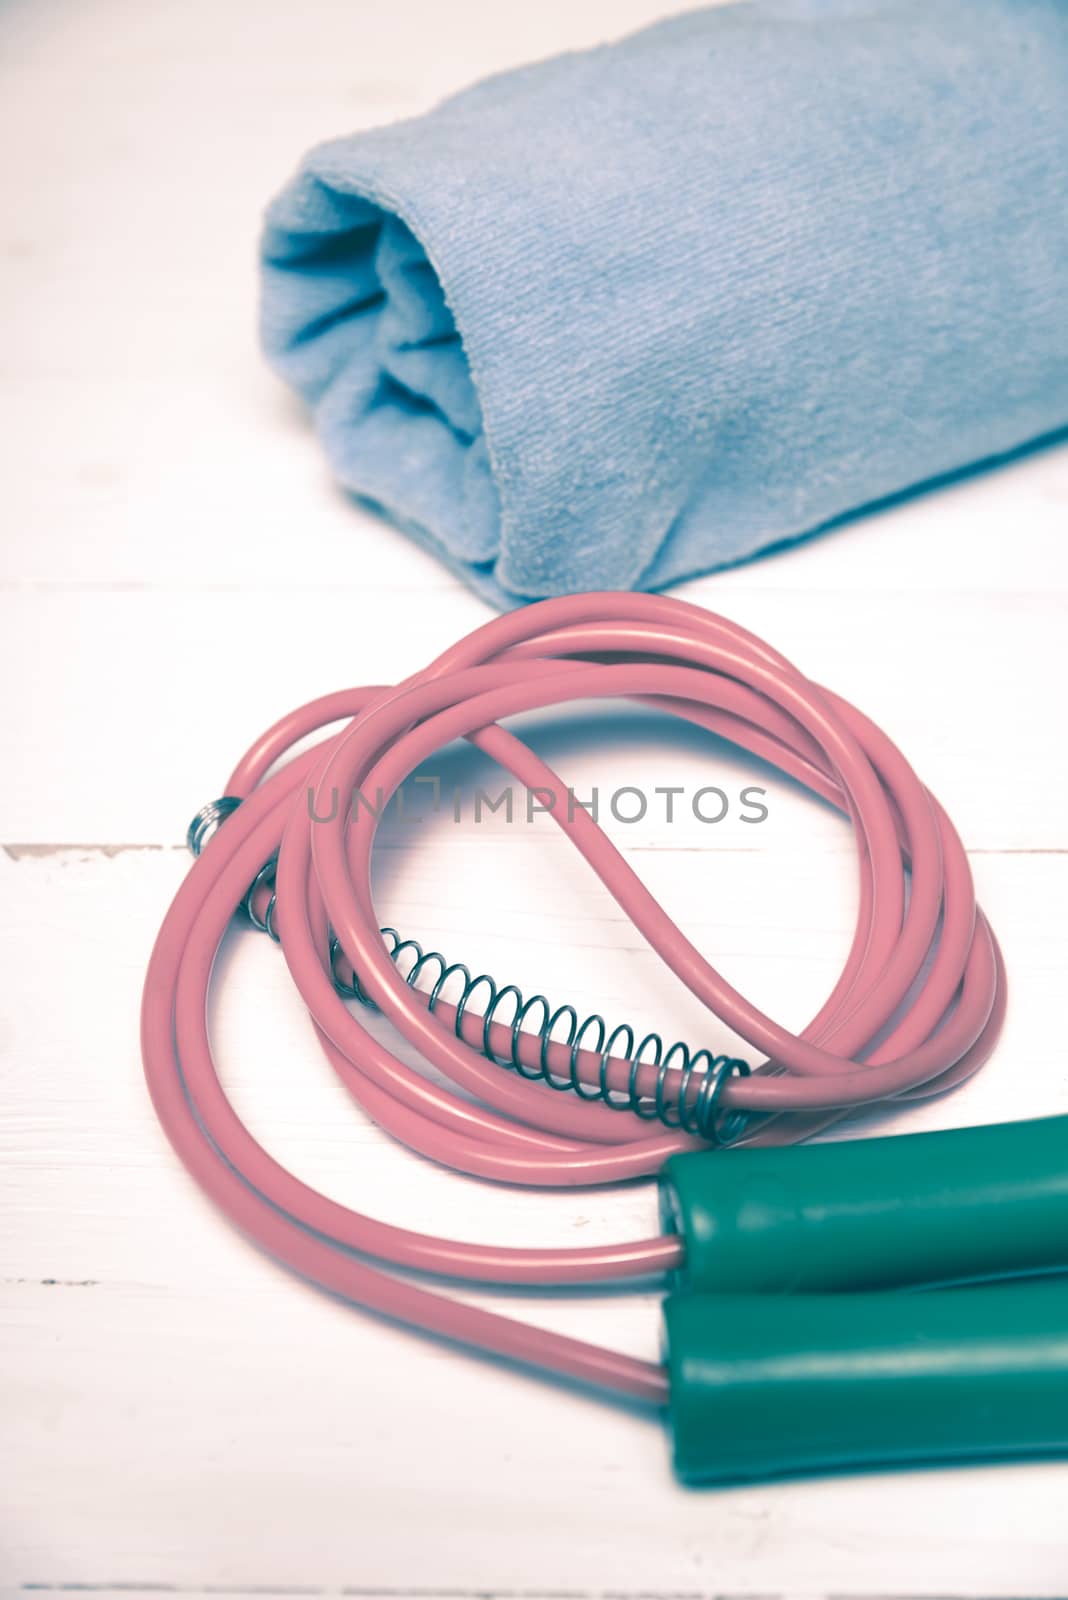 fitness equipment:blue towel,jumping rope on white wood table vintage style